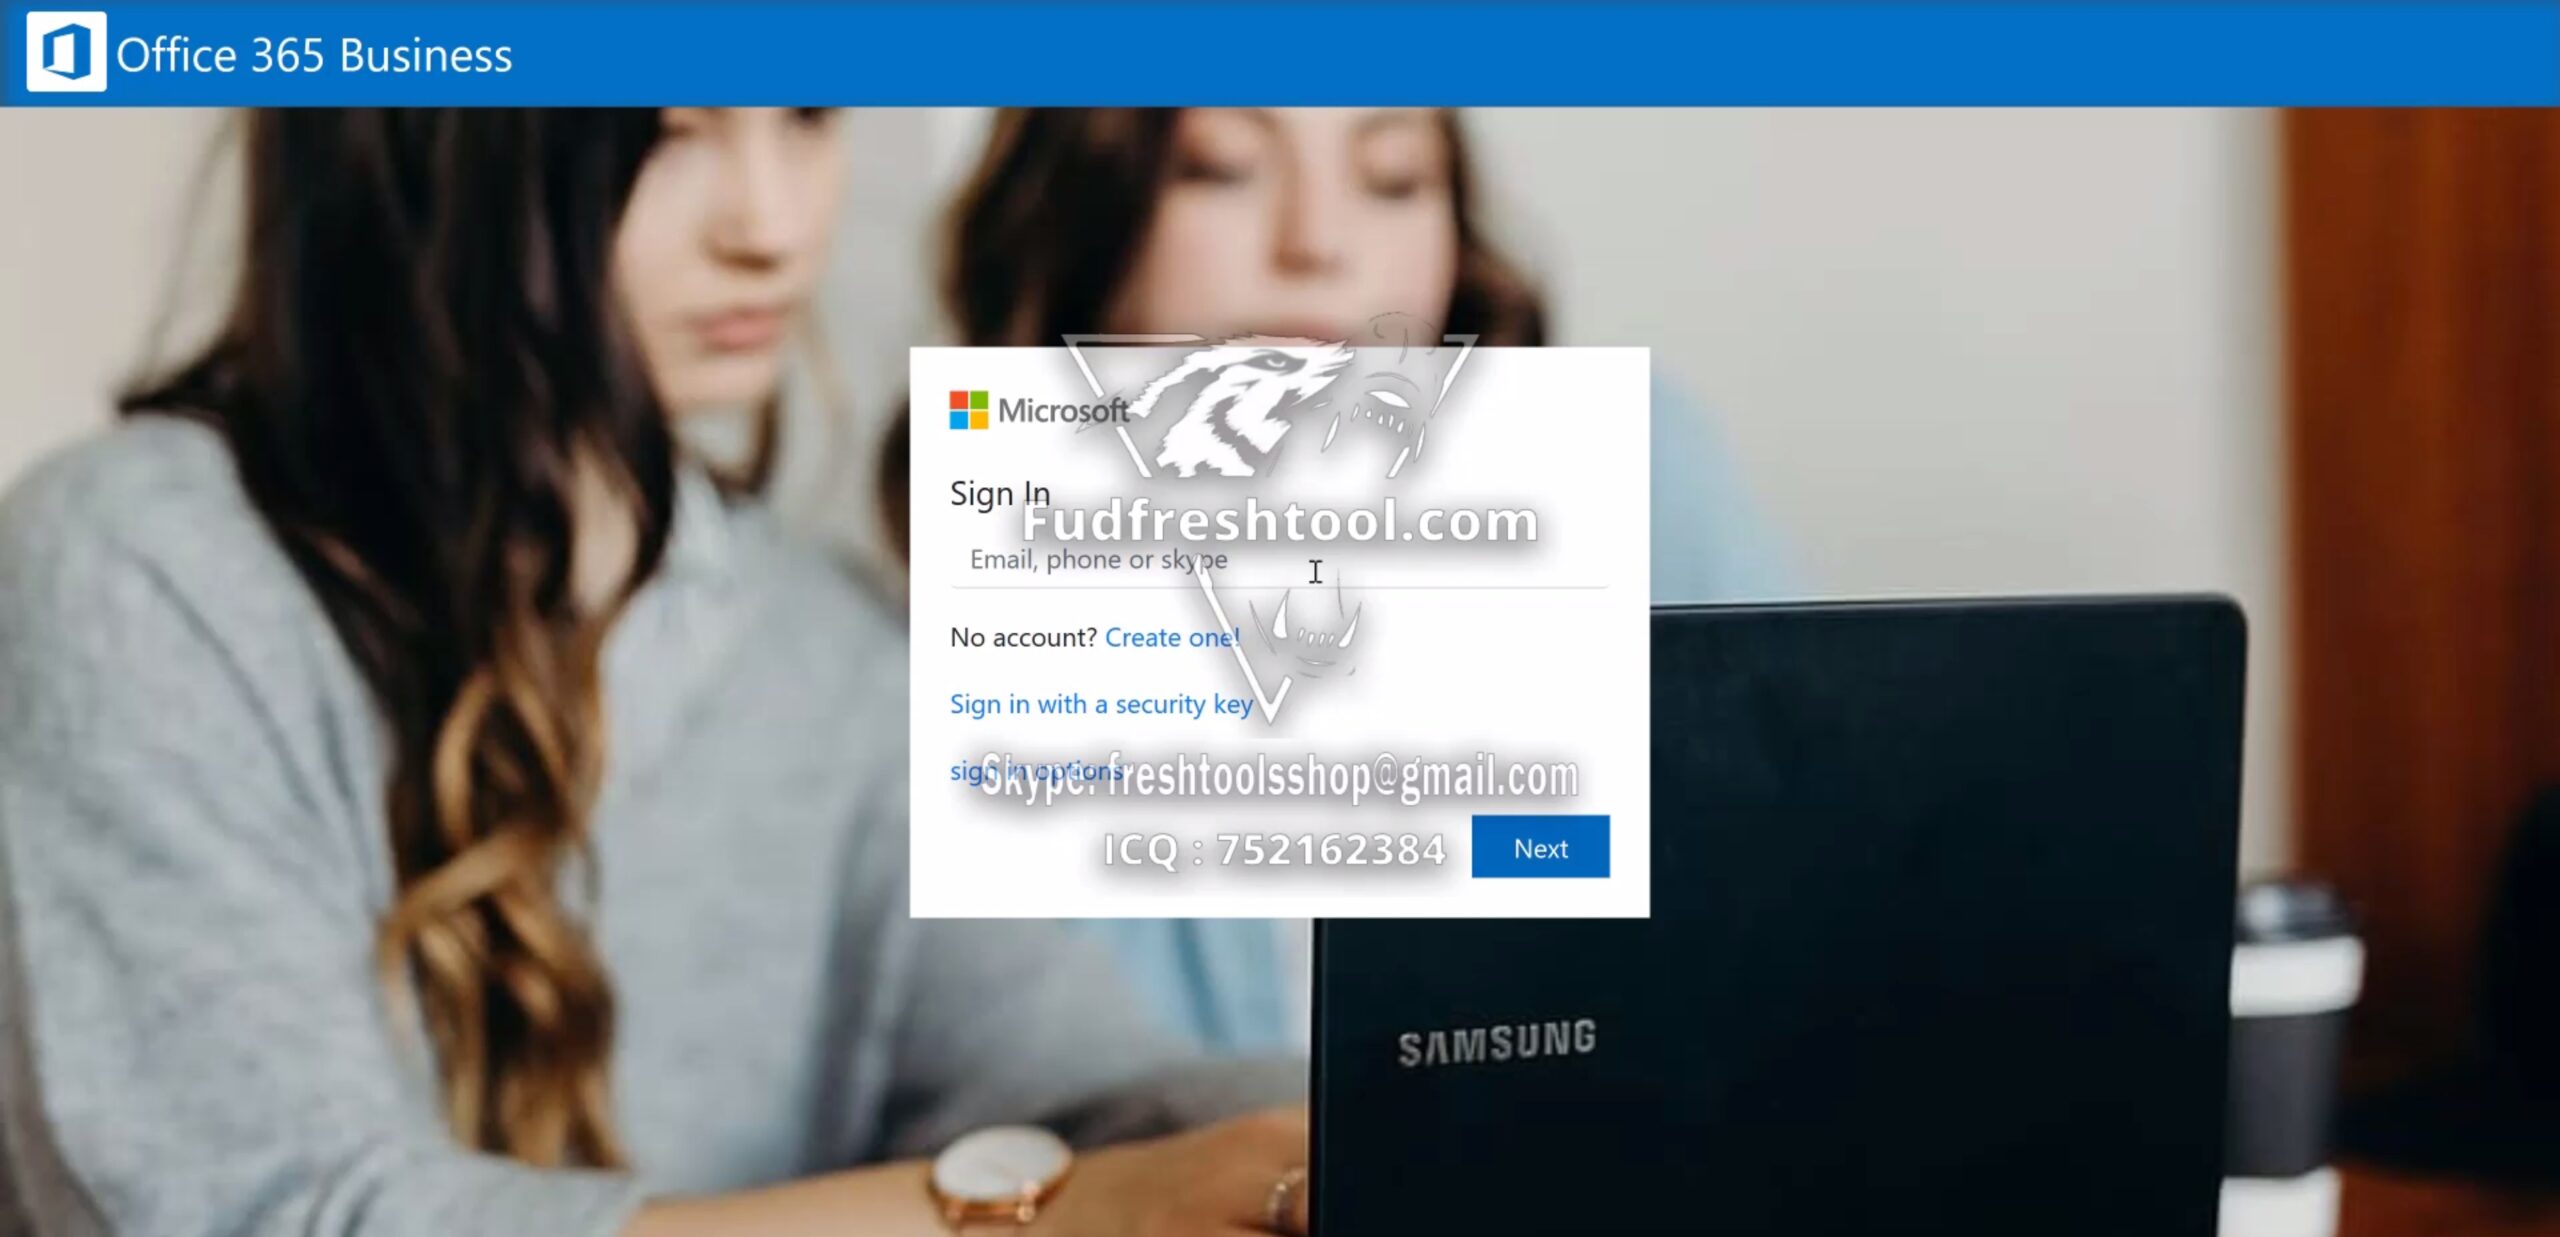 New Office 365 Scam Page